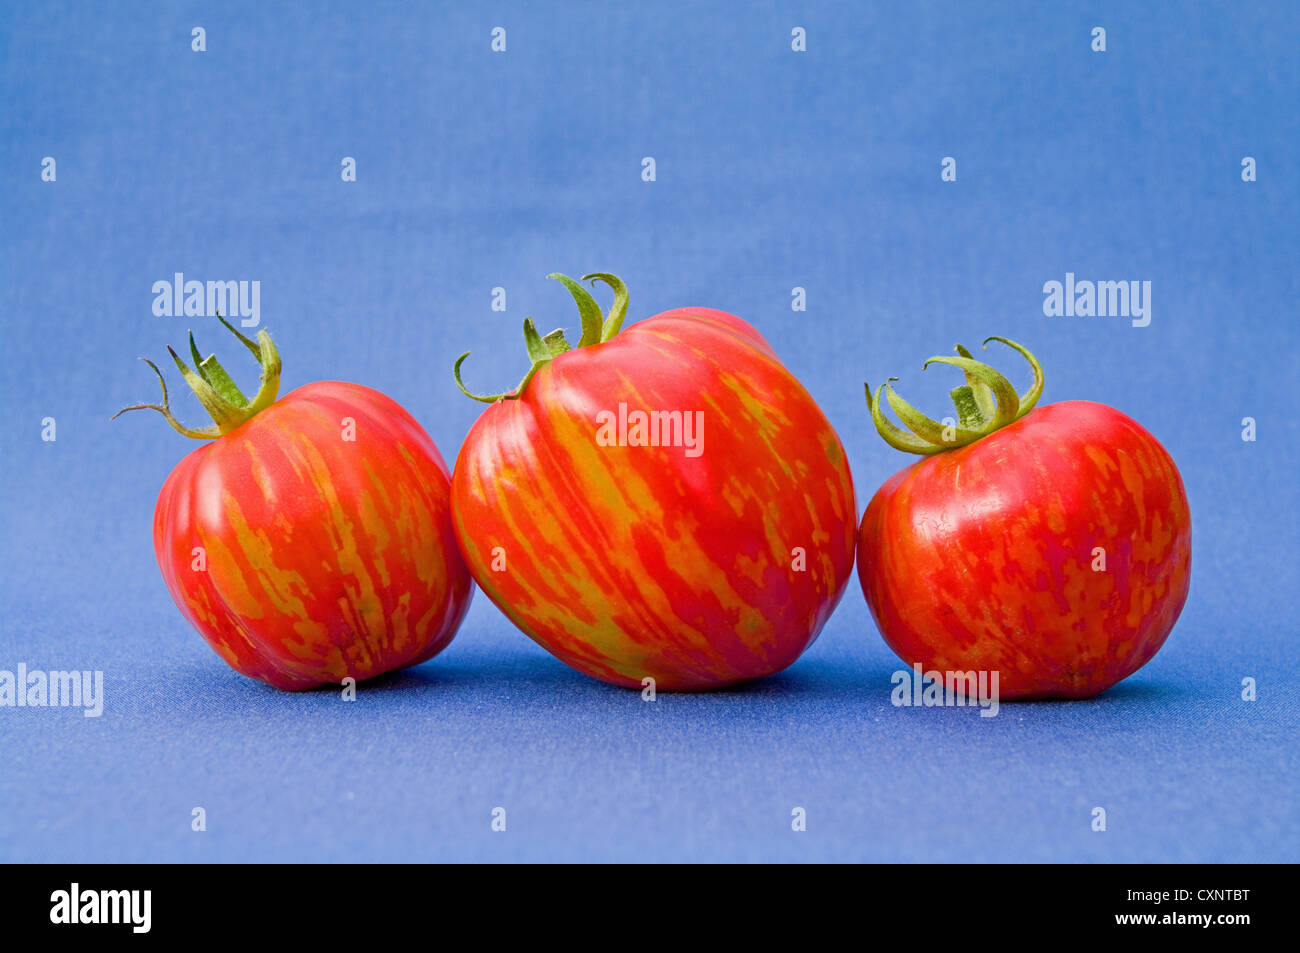 Still life studio shot: close up of three red and yellow ripe Striped Stuffer tomatoes arranged against a blue background Stock Photo